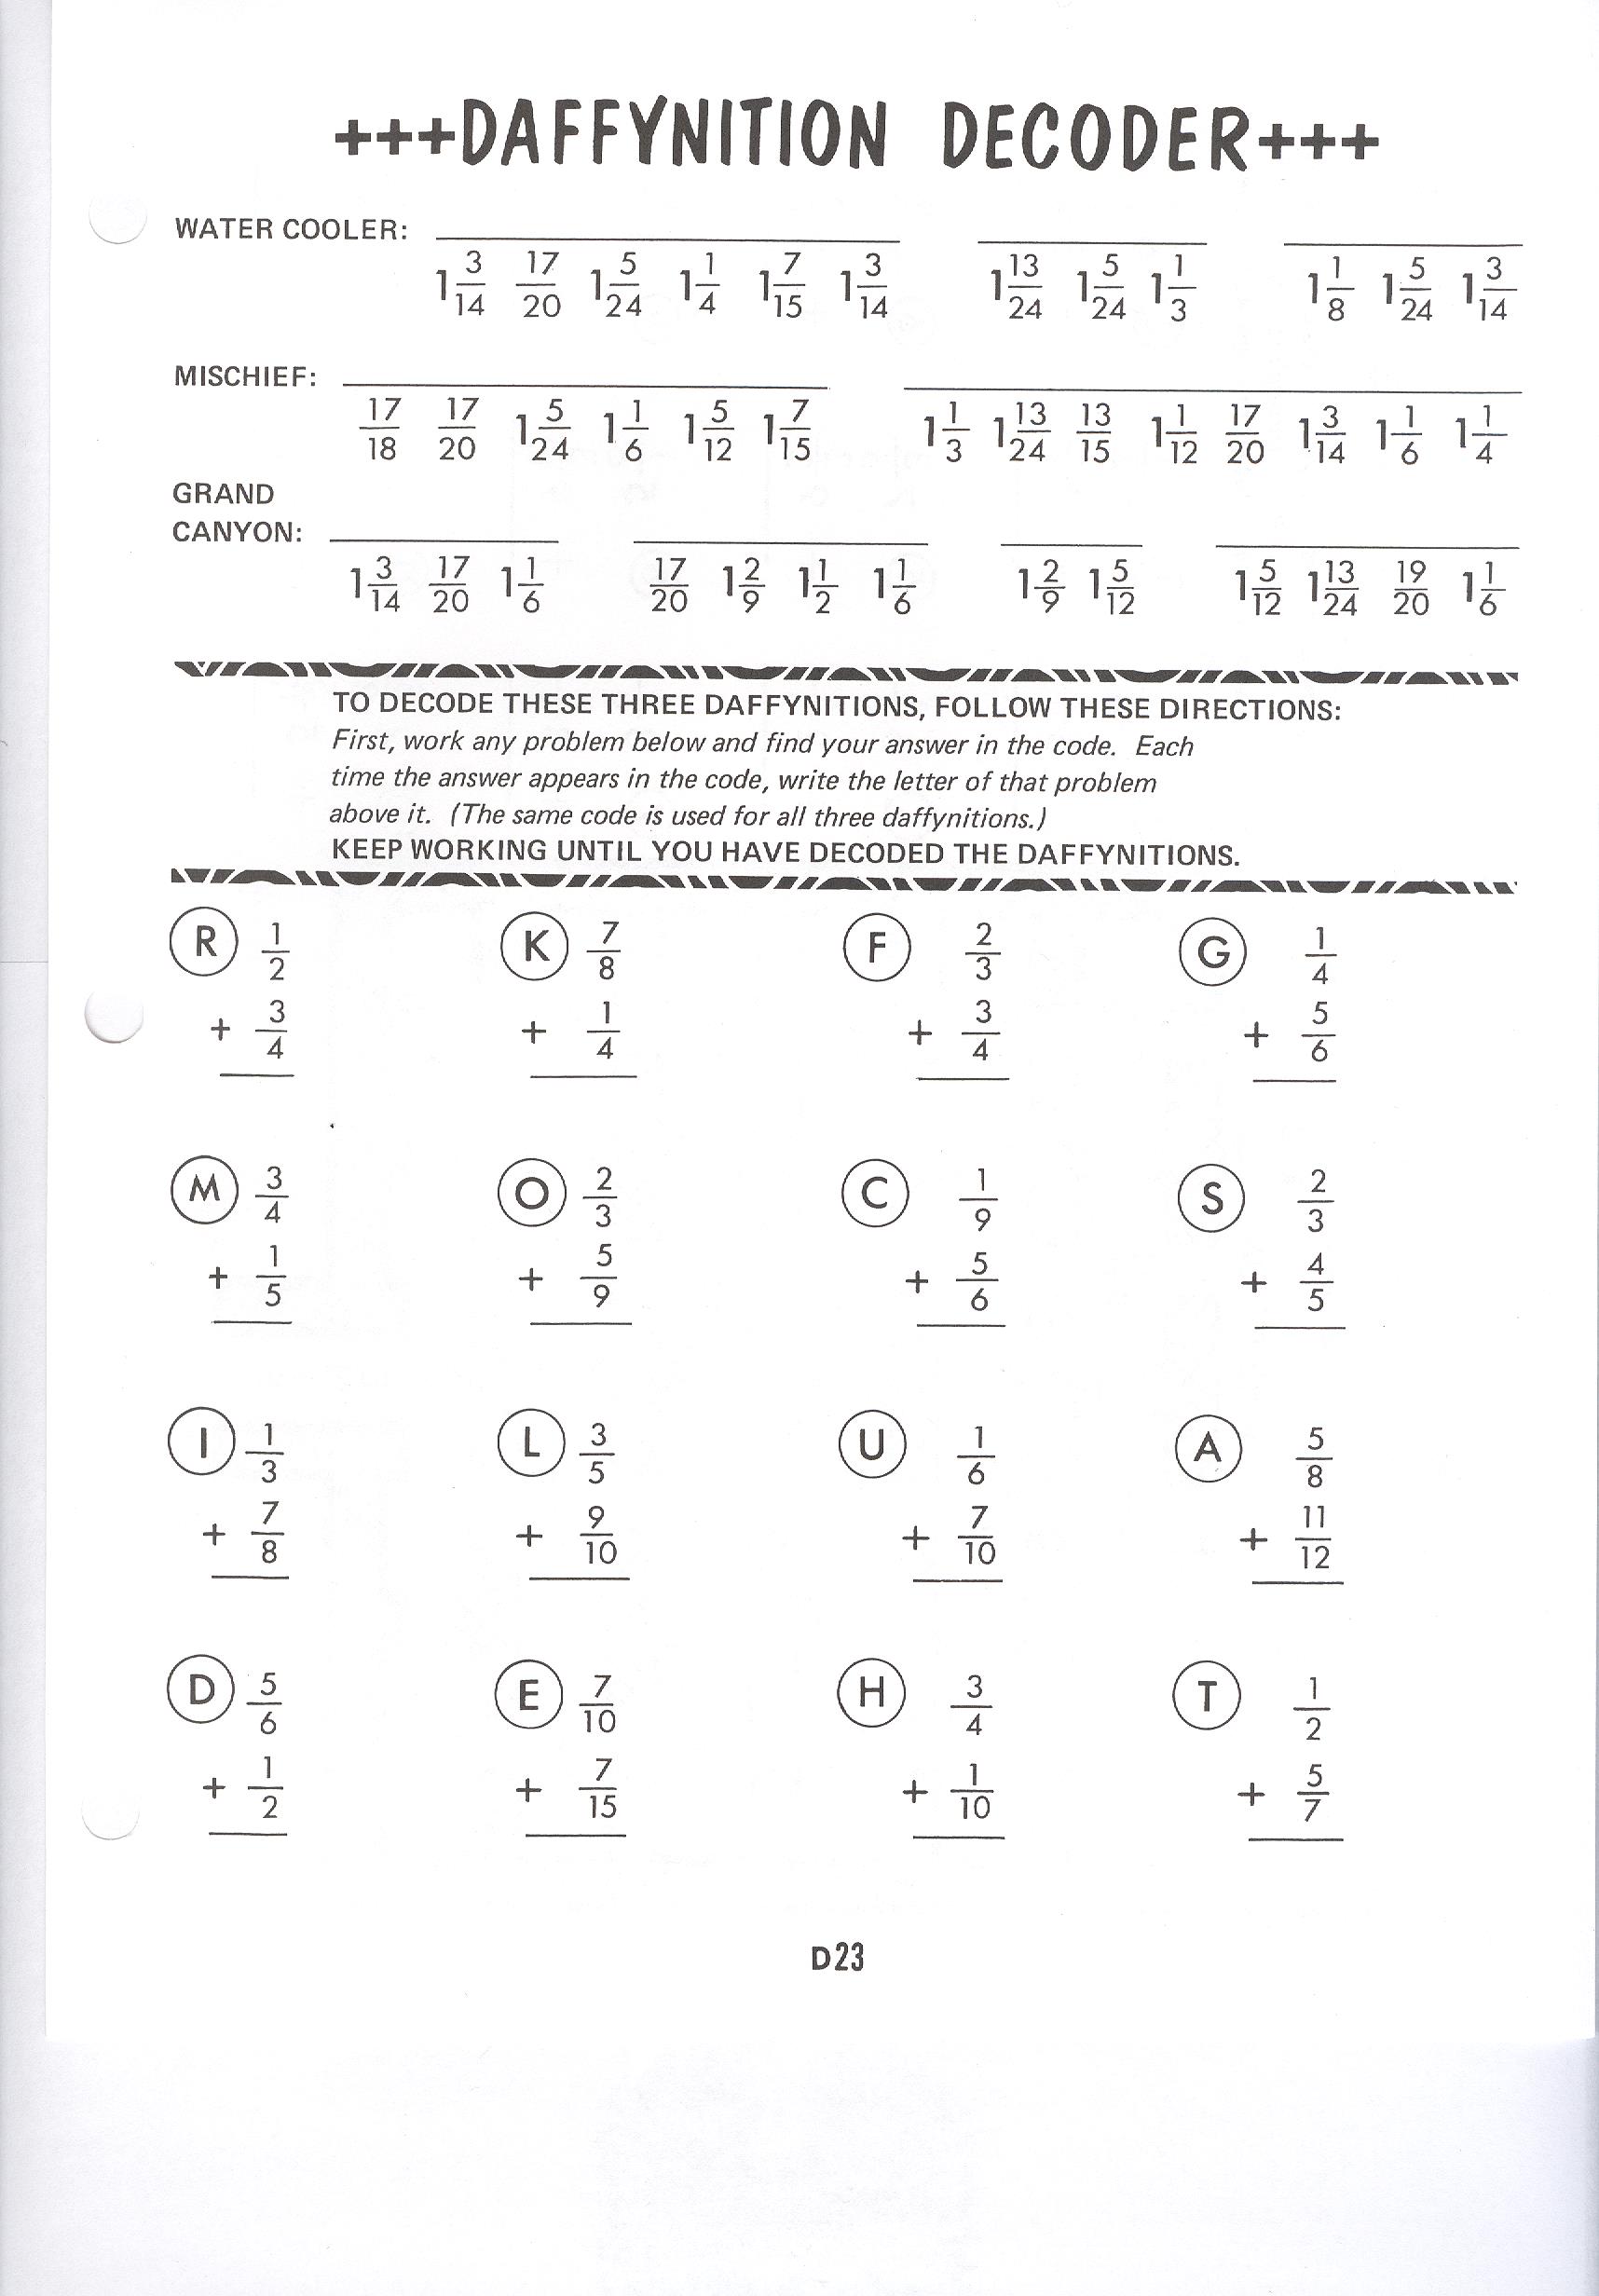 Daddy Ition Decoder Answes Worksheet Daffynition Decoder Answer Key Schematic And